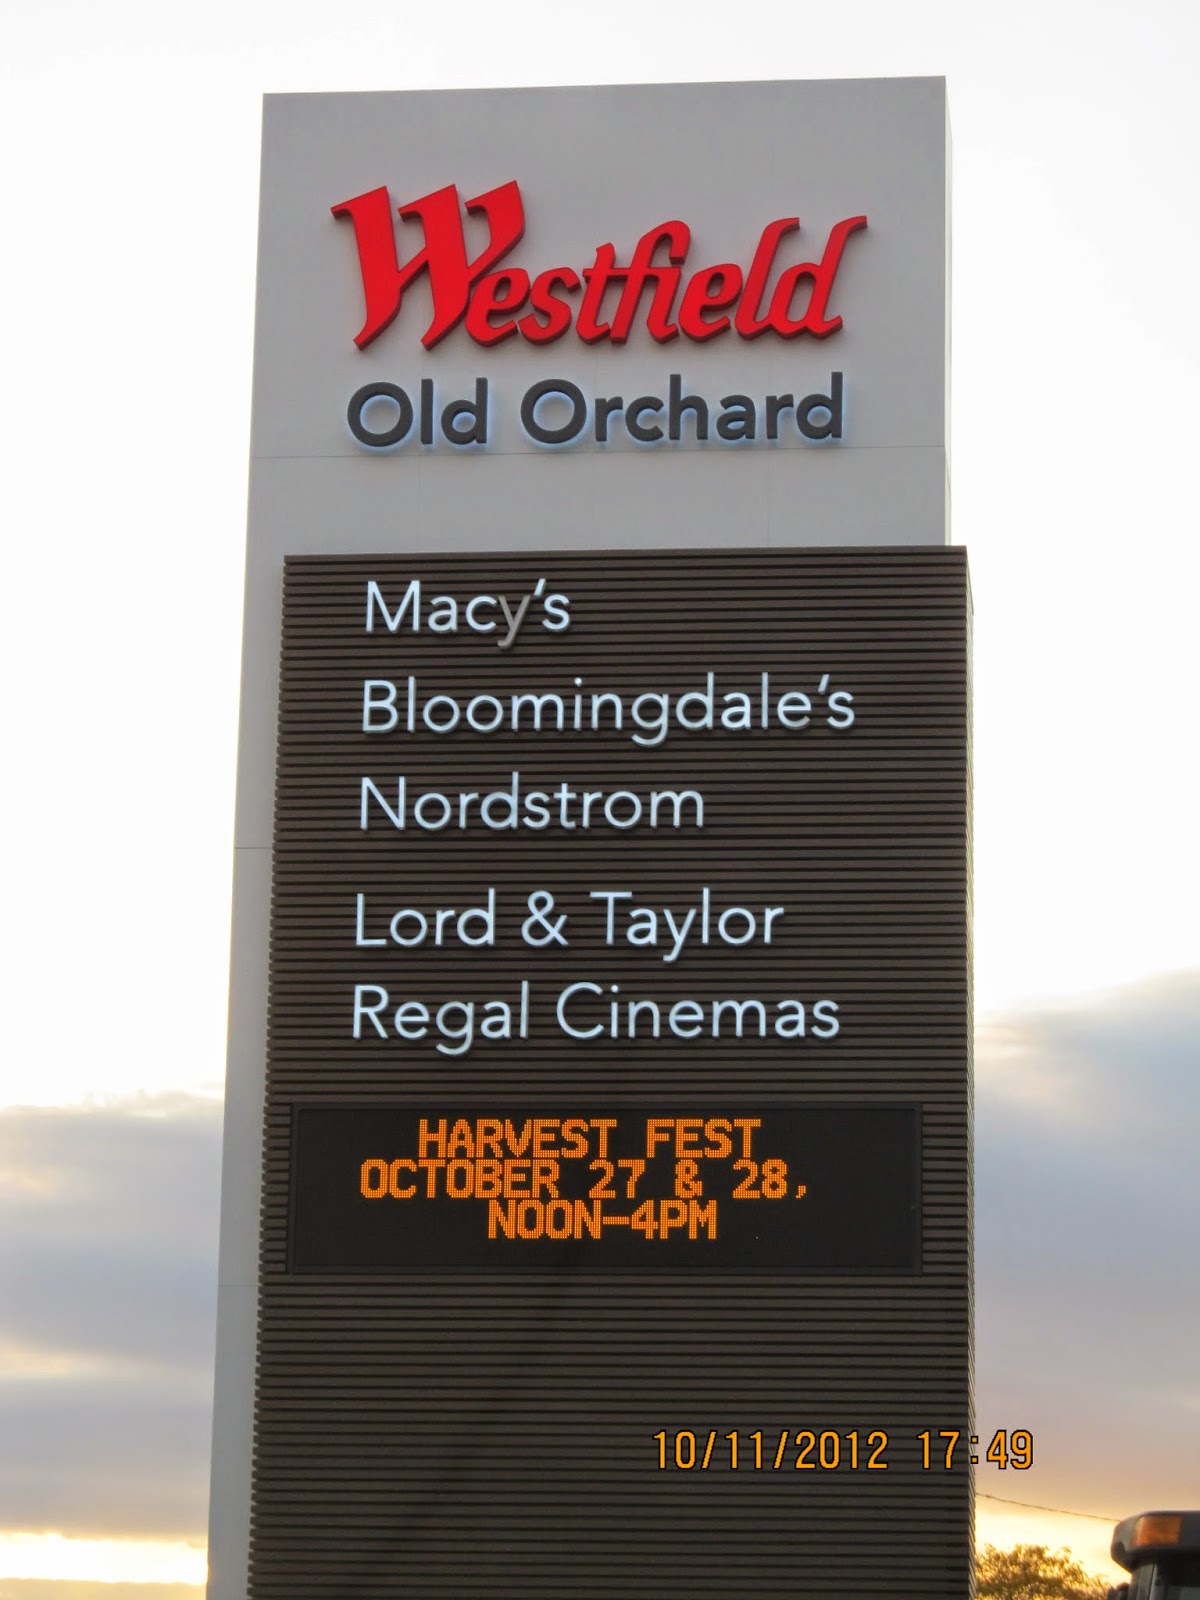 Why will it cost more to shop at Old Orchard Shopping Center